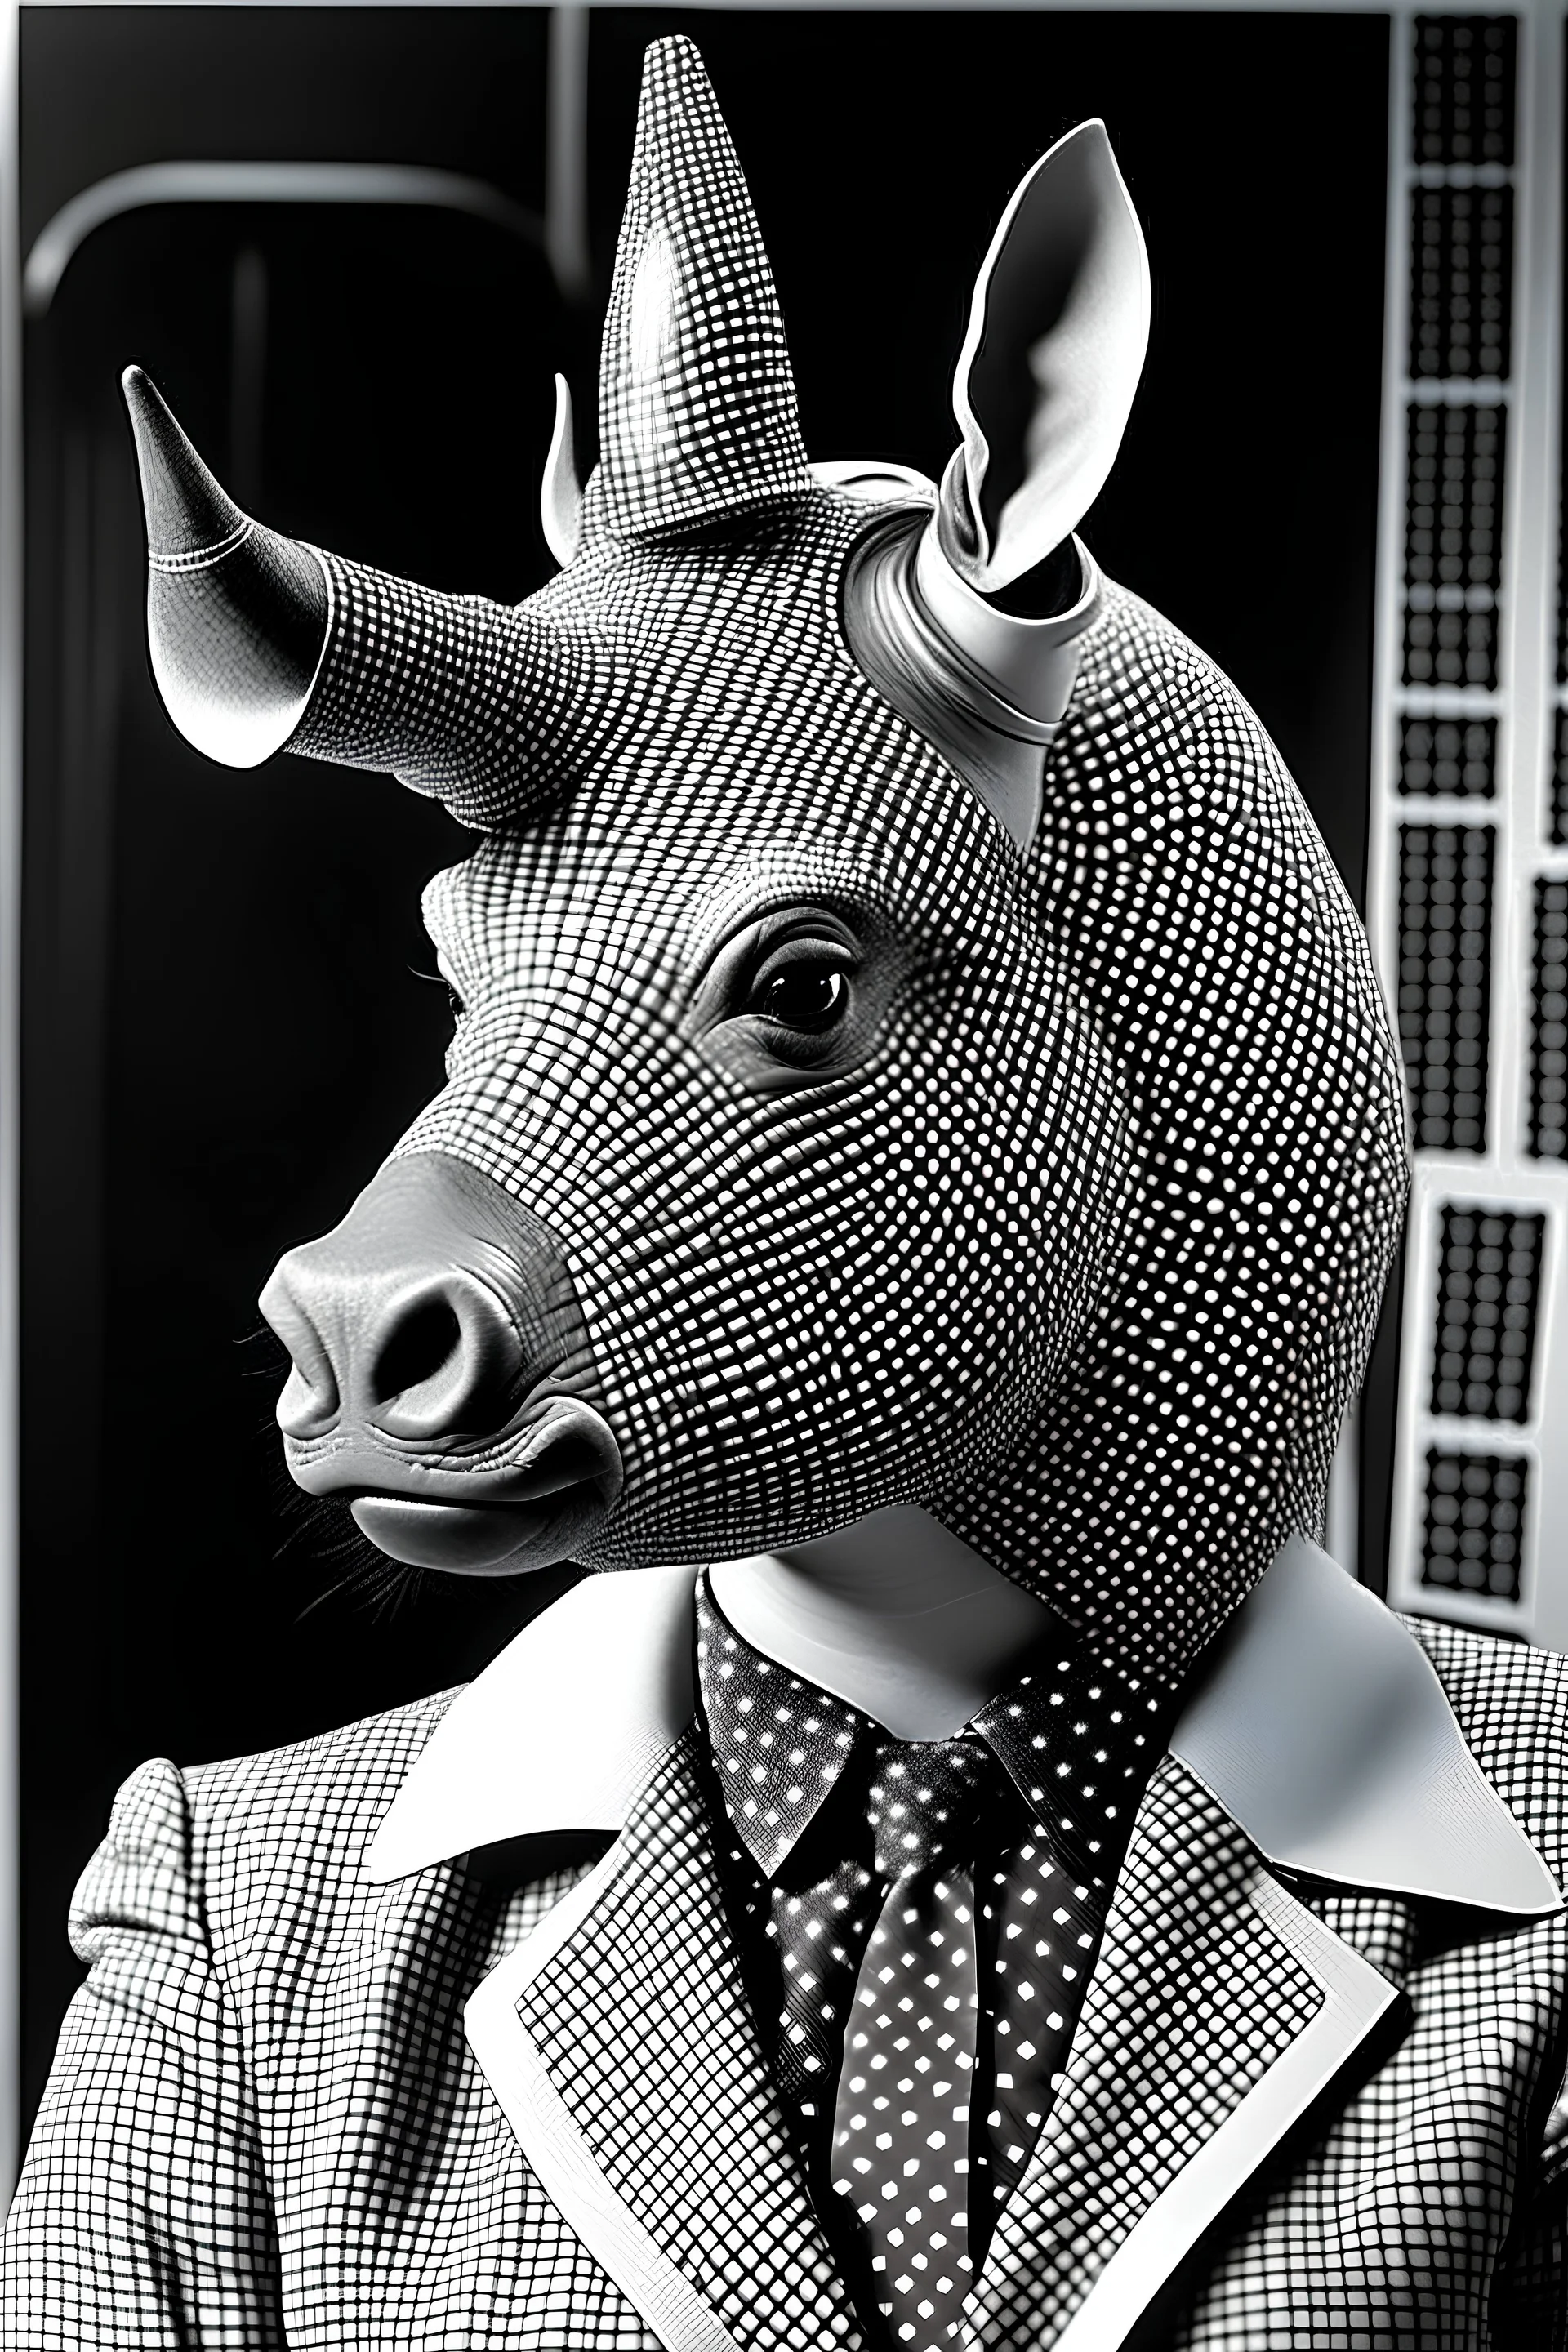 a headpiece merge with rhinoceros and grid, 1960s office style with monitor eyes